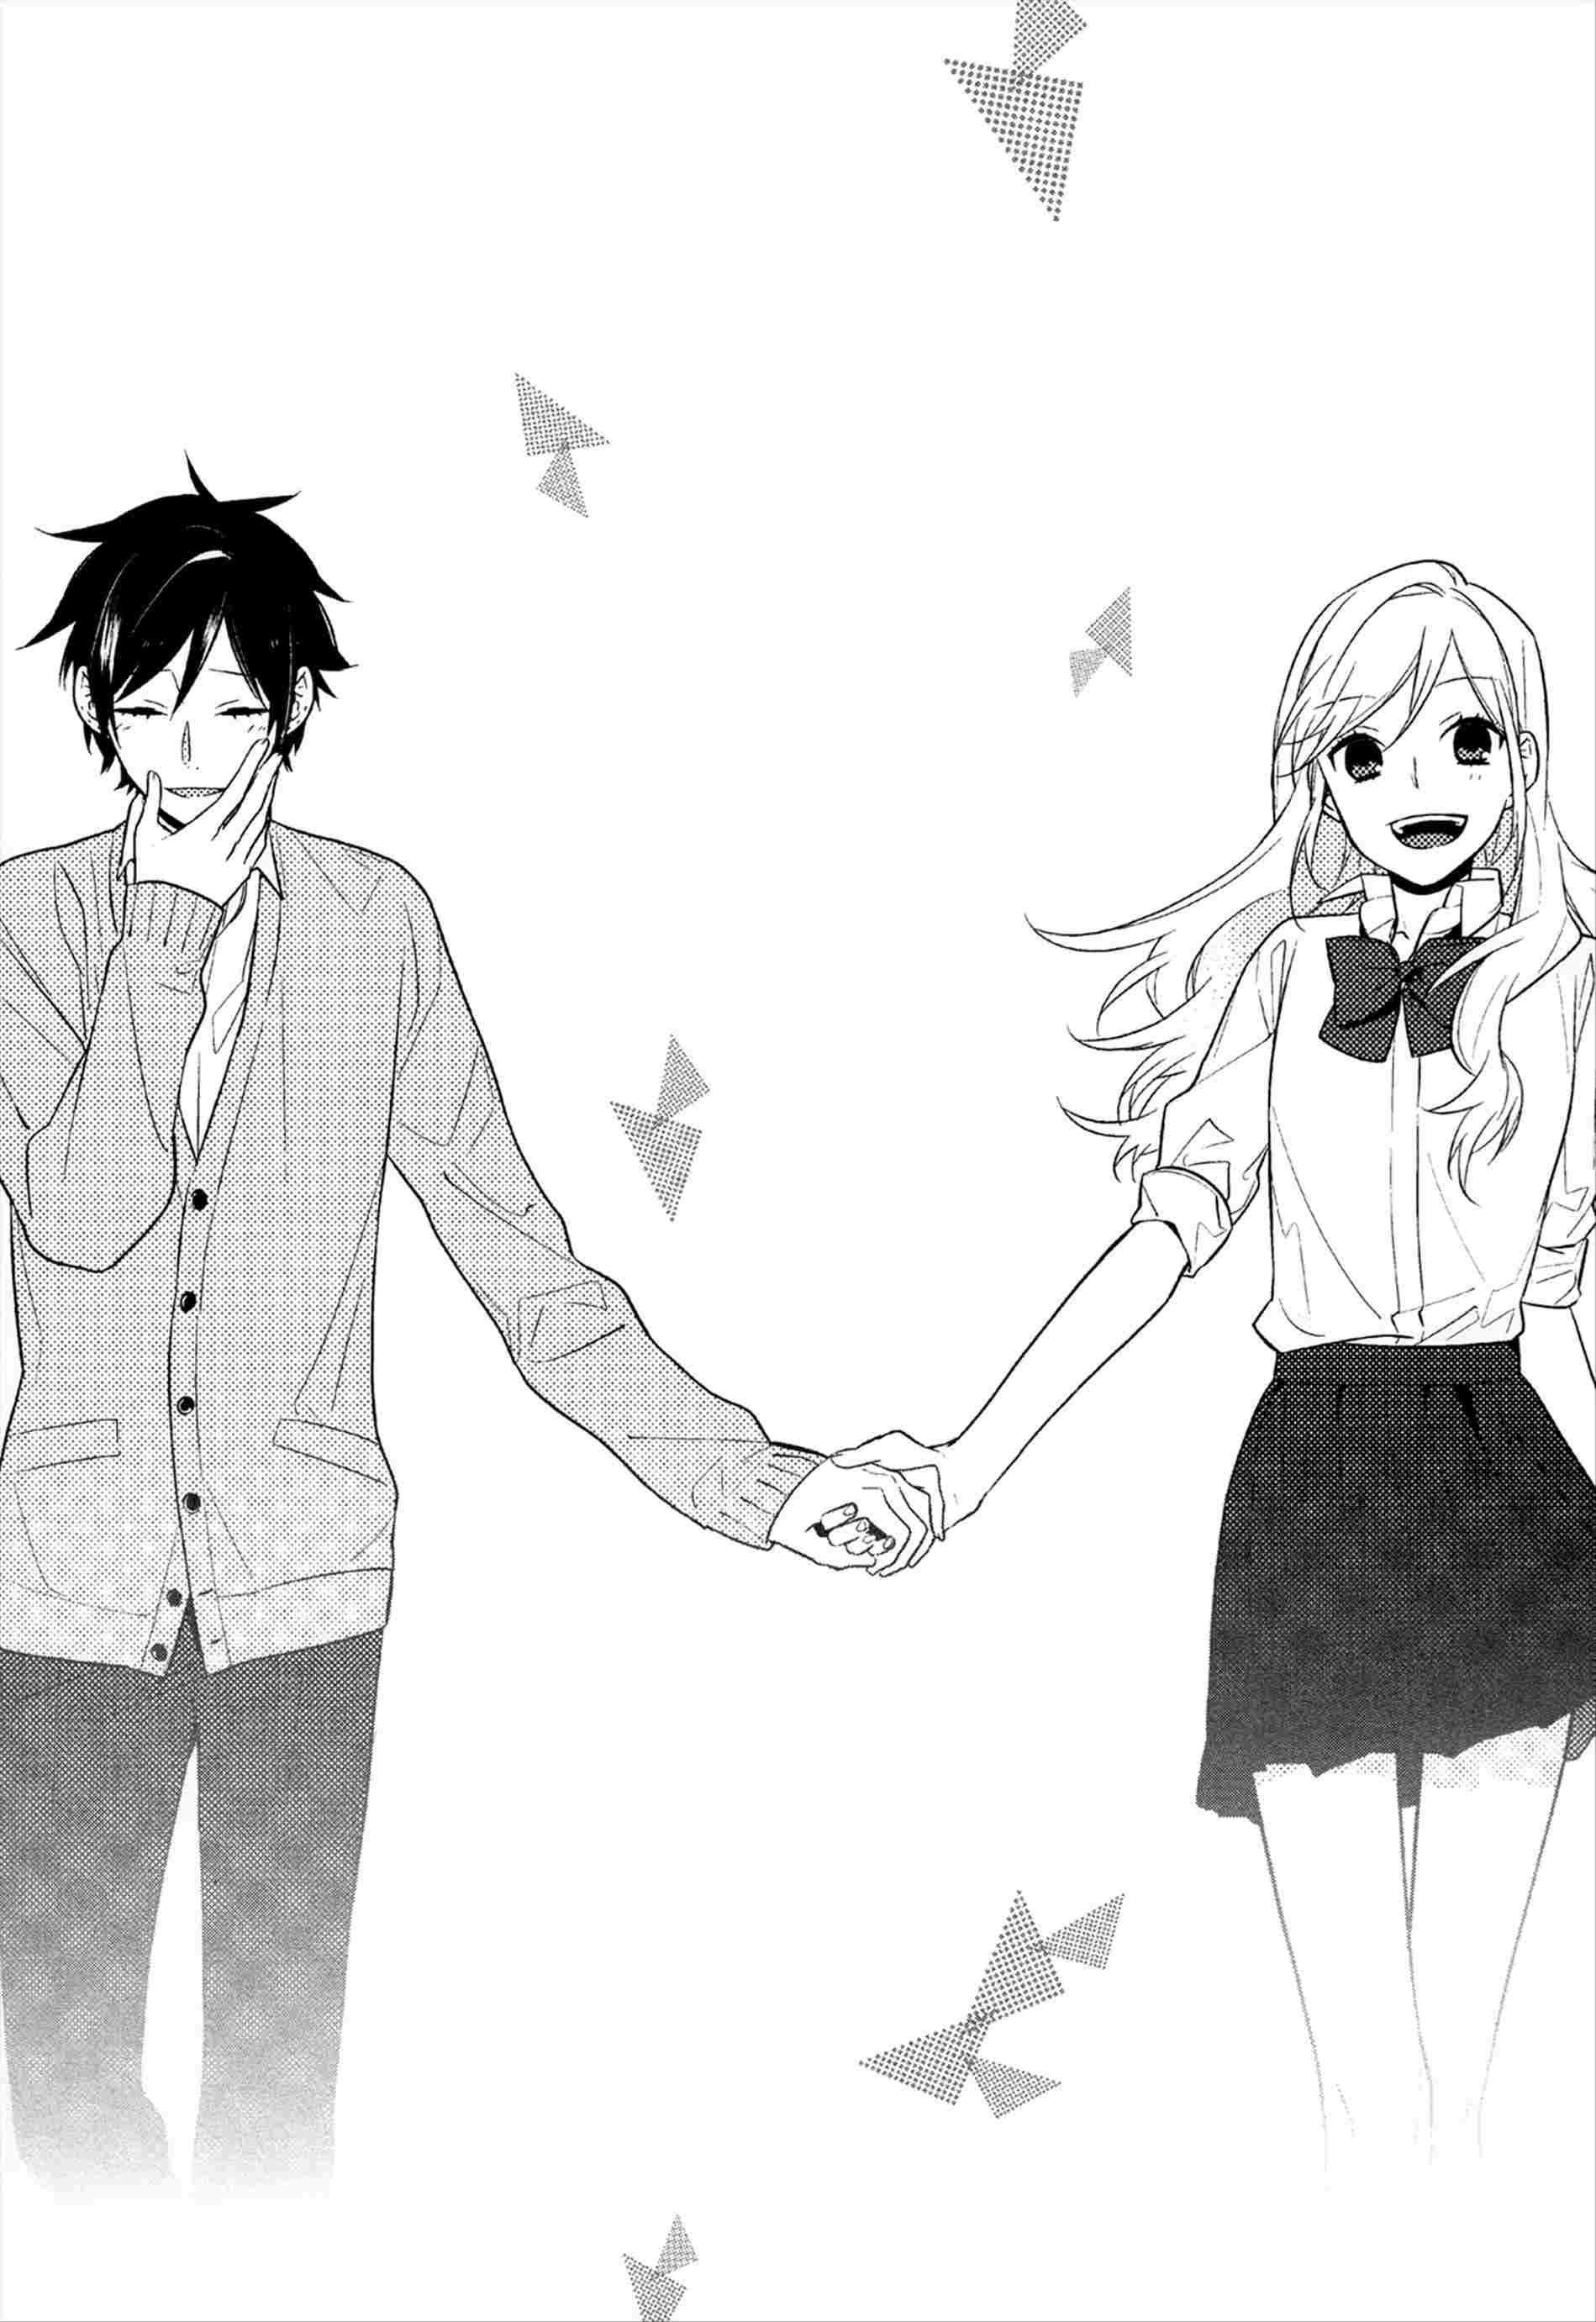 How To Draw An Anime Couple Holding Hands